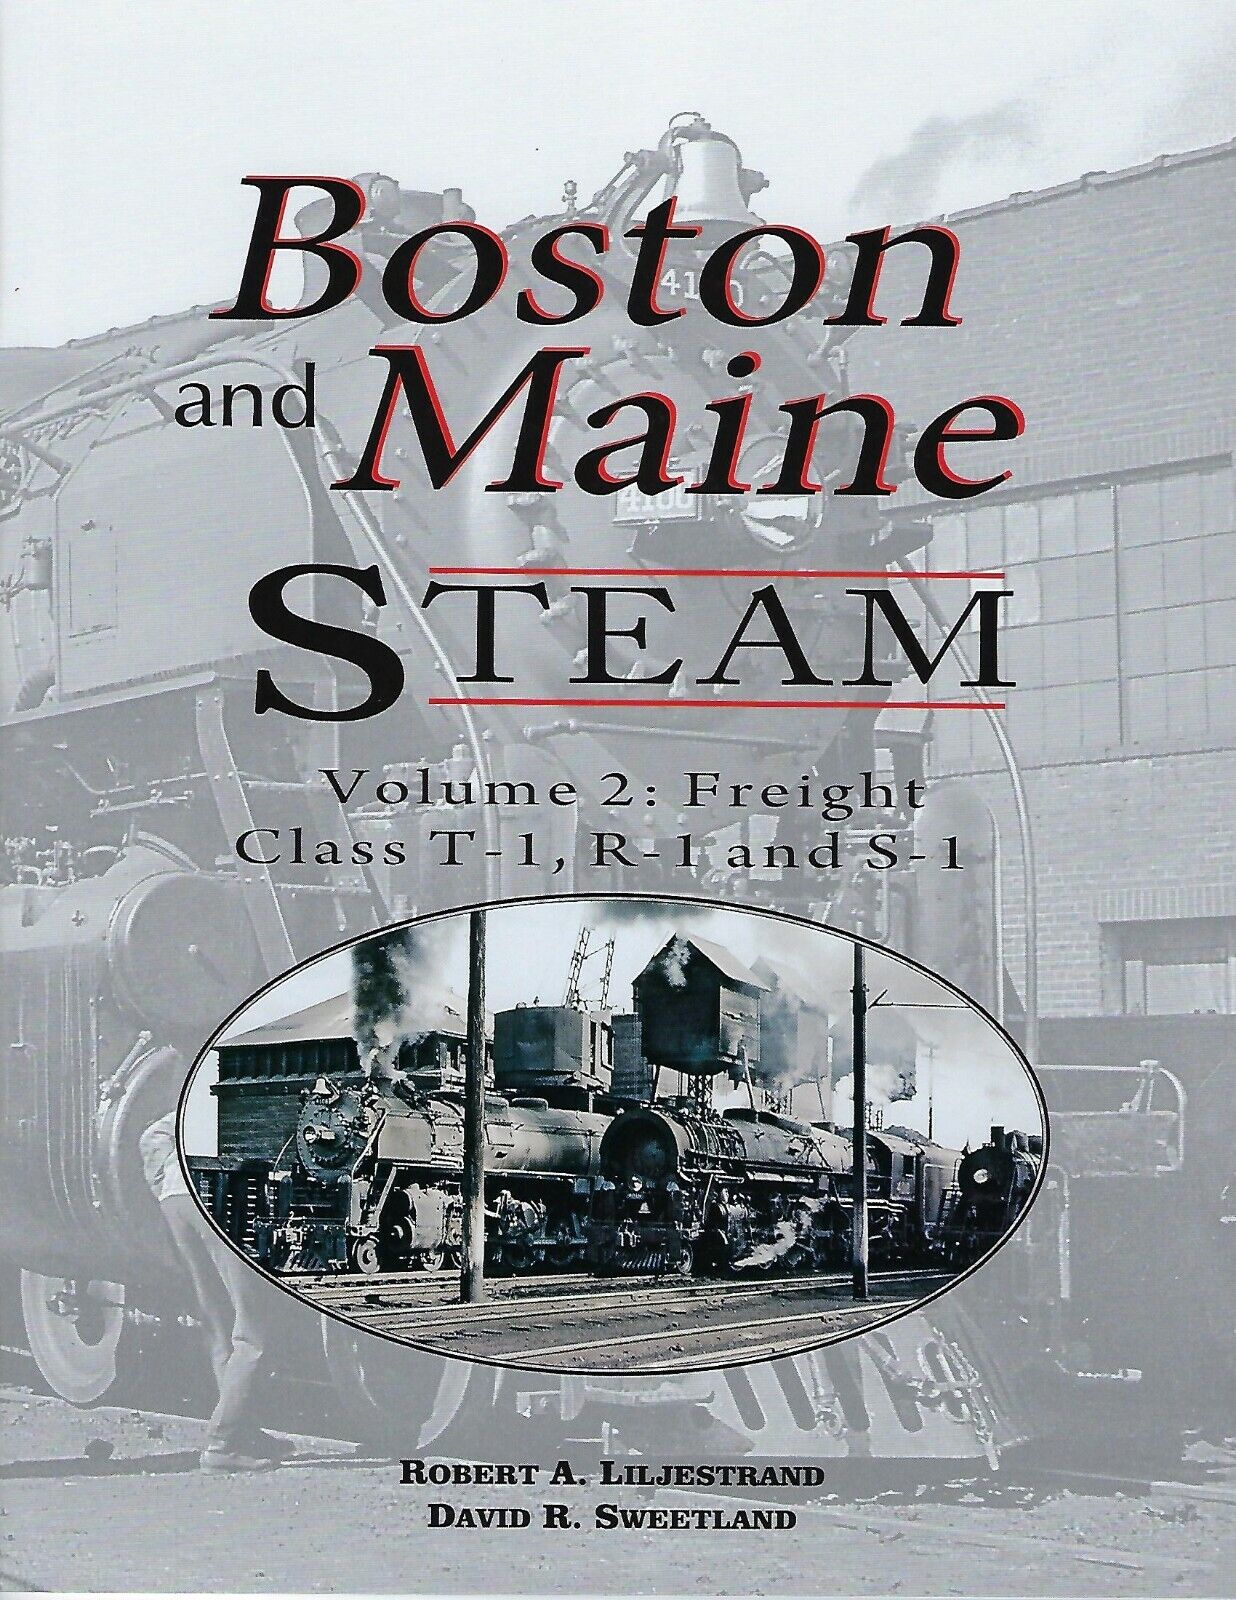 Boston and Maine STEAM, Vol. 2: FREIGHT, Class T-1, R-1 and S-1 (BRAND NEW BOOK)